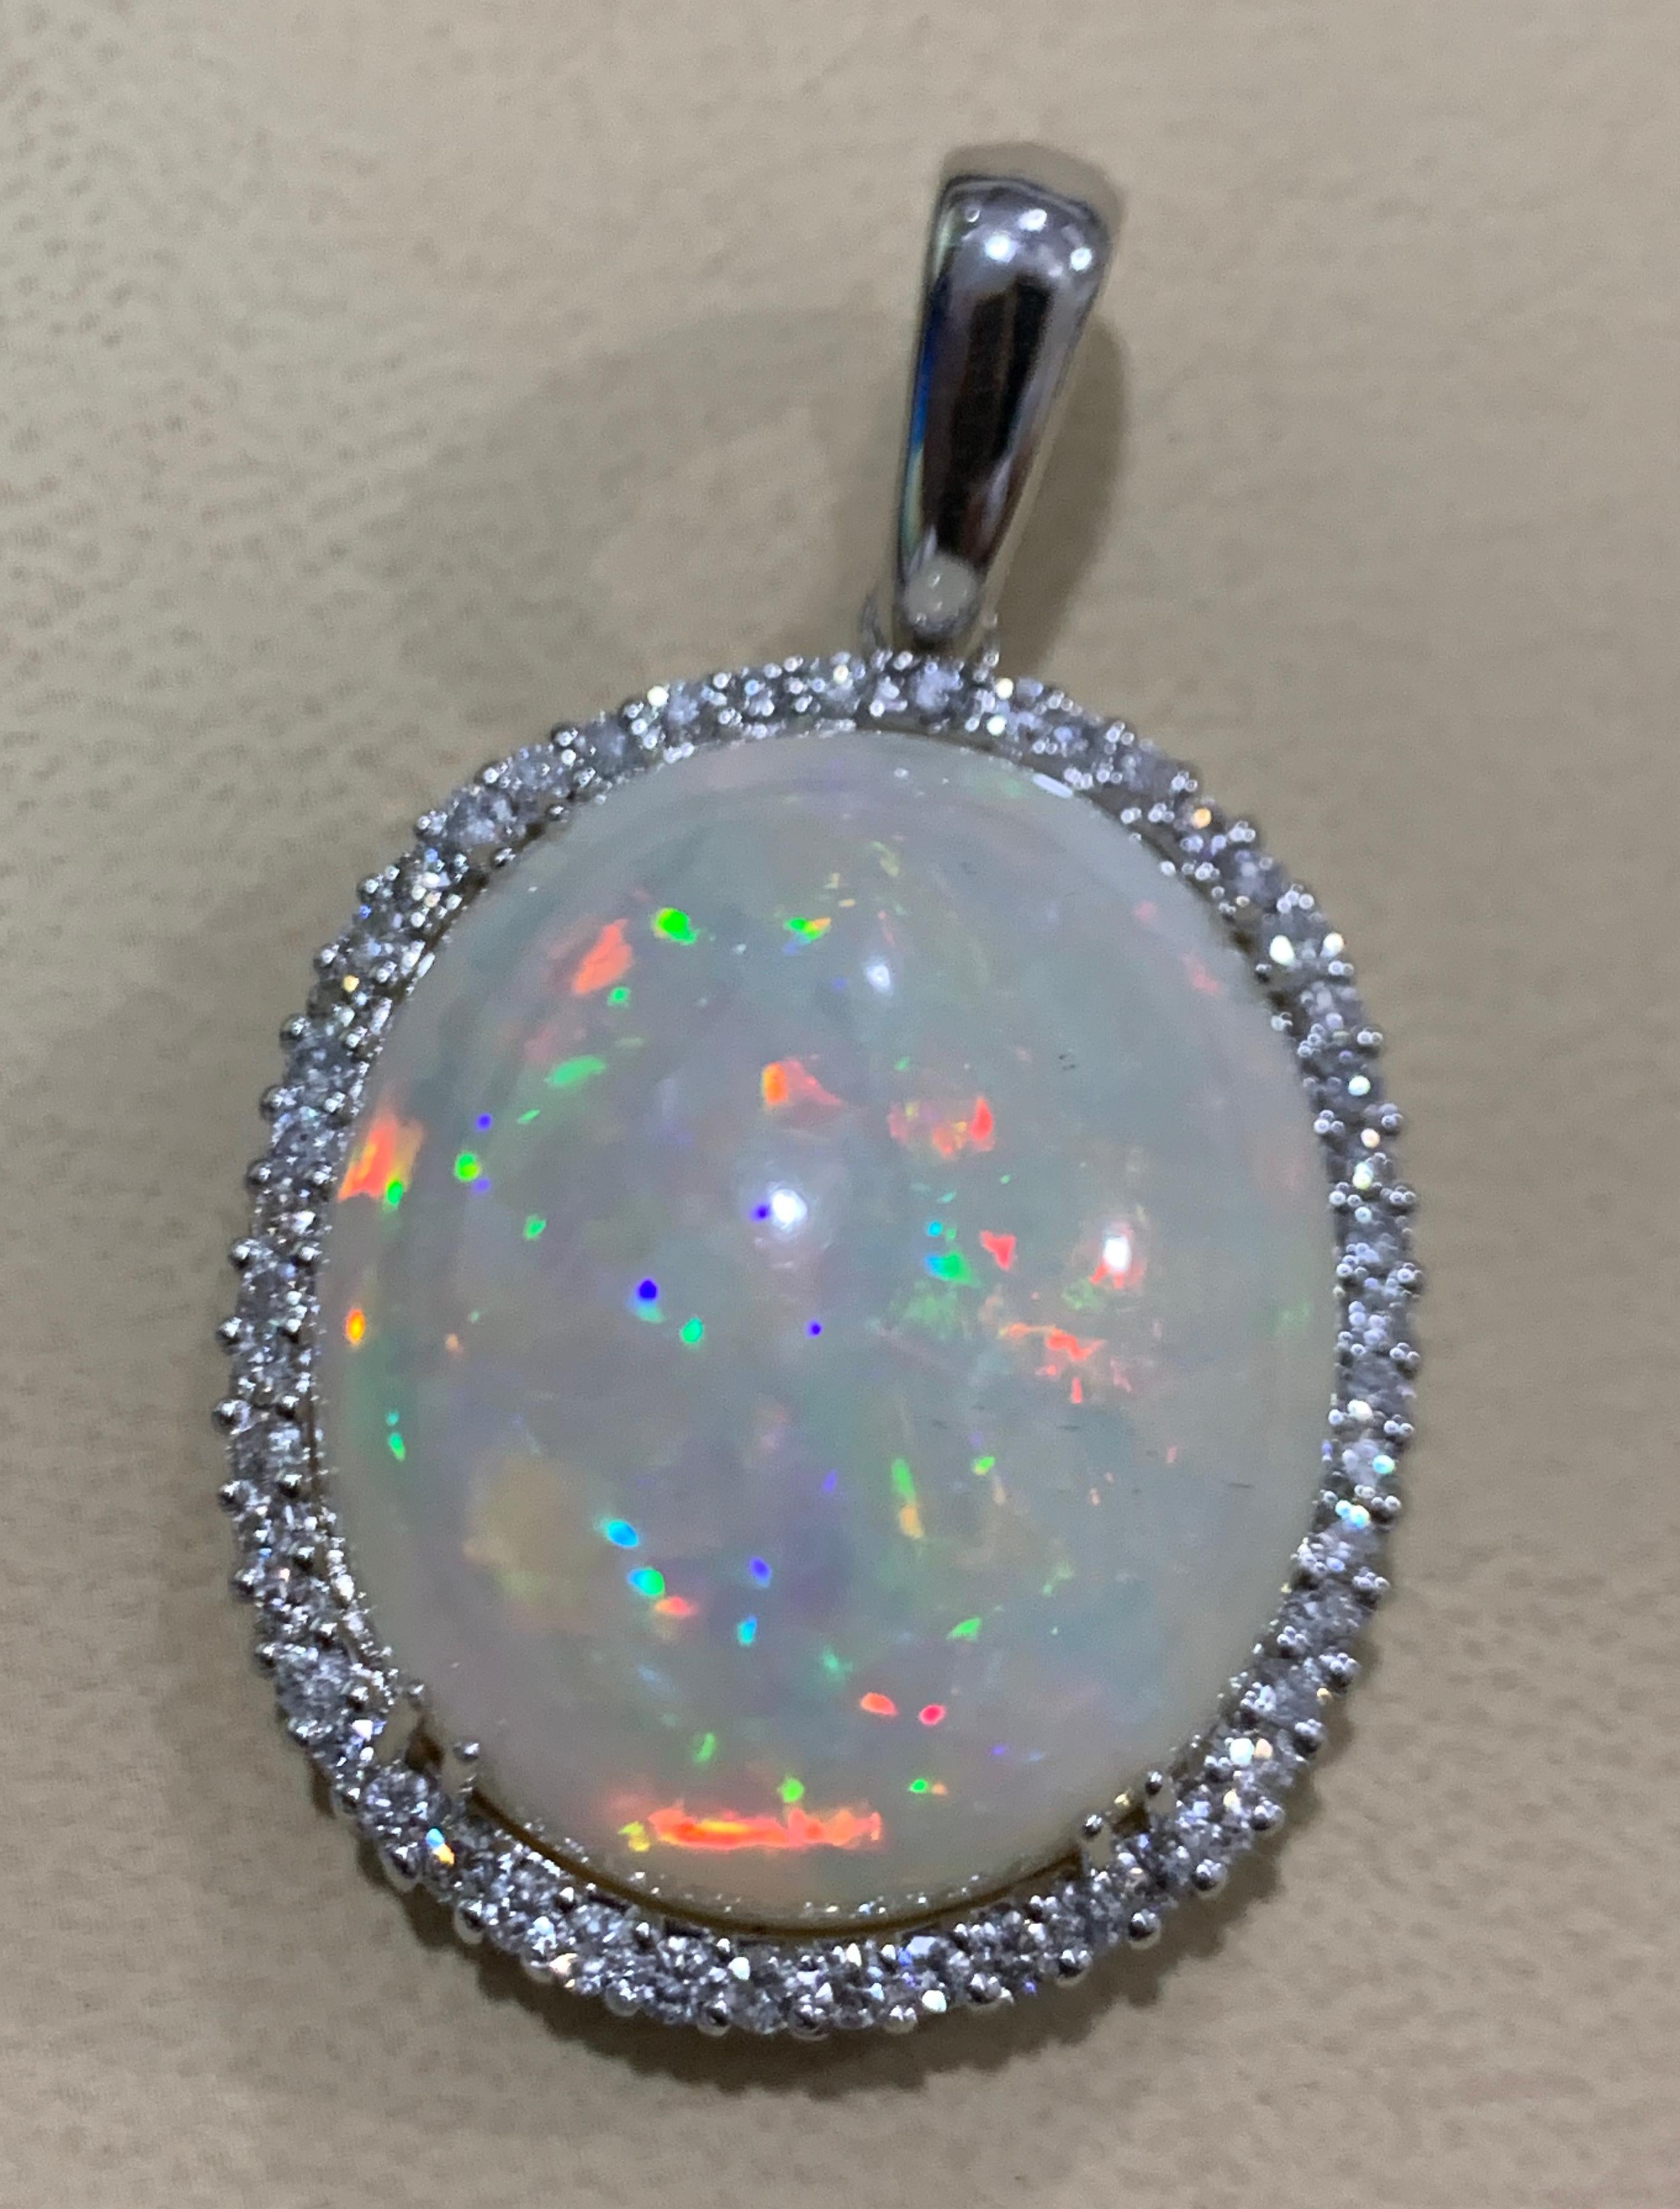 54 Carat Oval Ethiopian Opal & Diamond Pendant / Necklace 14 Karat Gold Estate White Gold 
This spectacular Pendant Necklace consisting of a single Oval Shape Ethiopian Opal Approximately 54 Carat. The Opal is surrounded by approximately 2.2 Carats